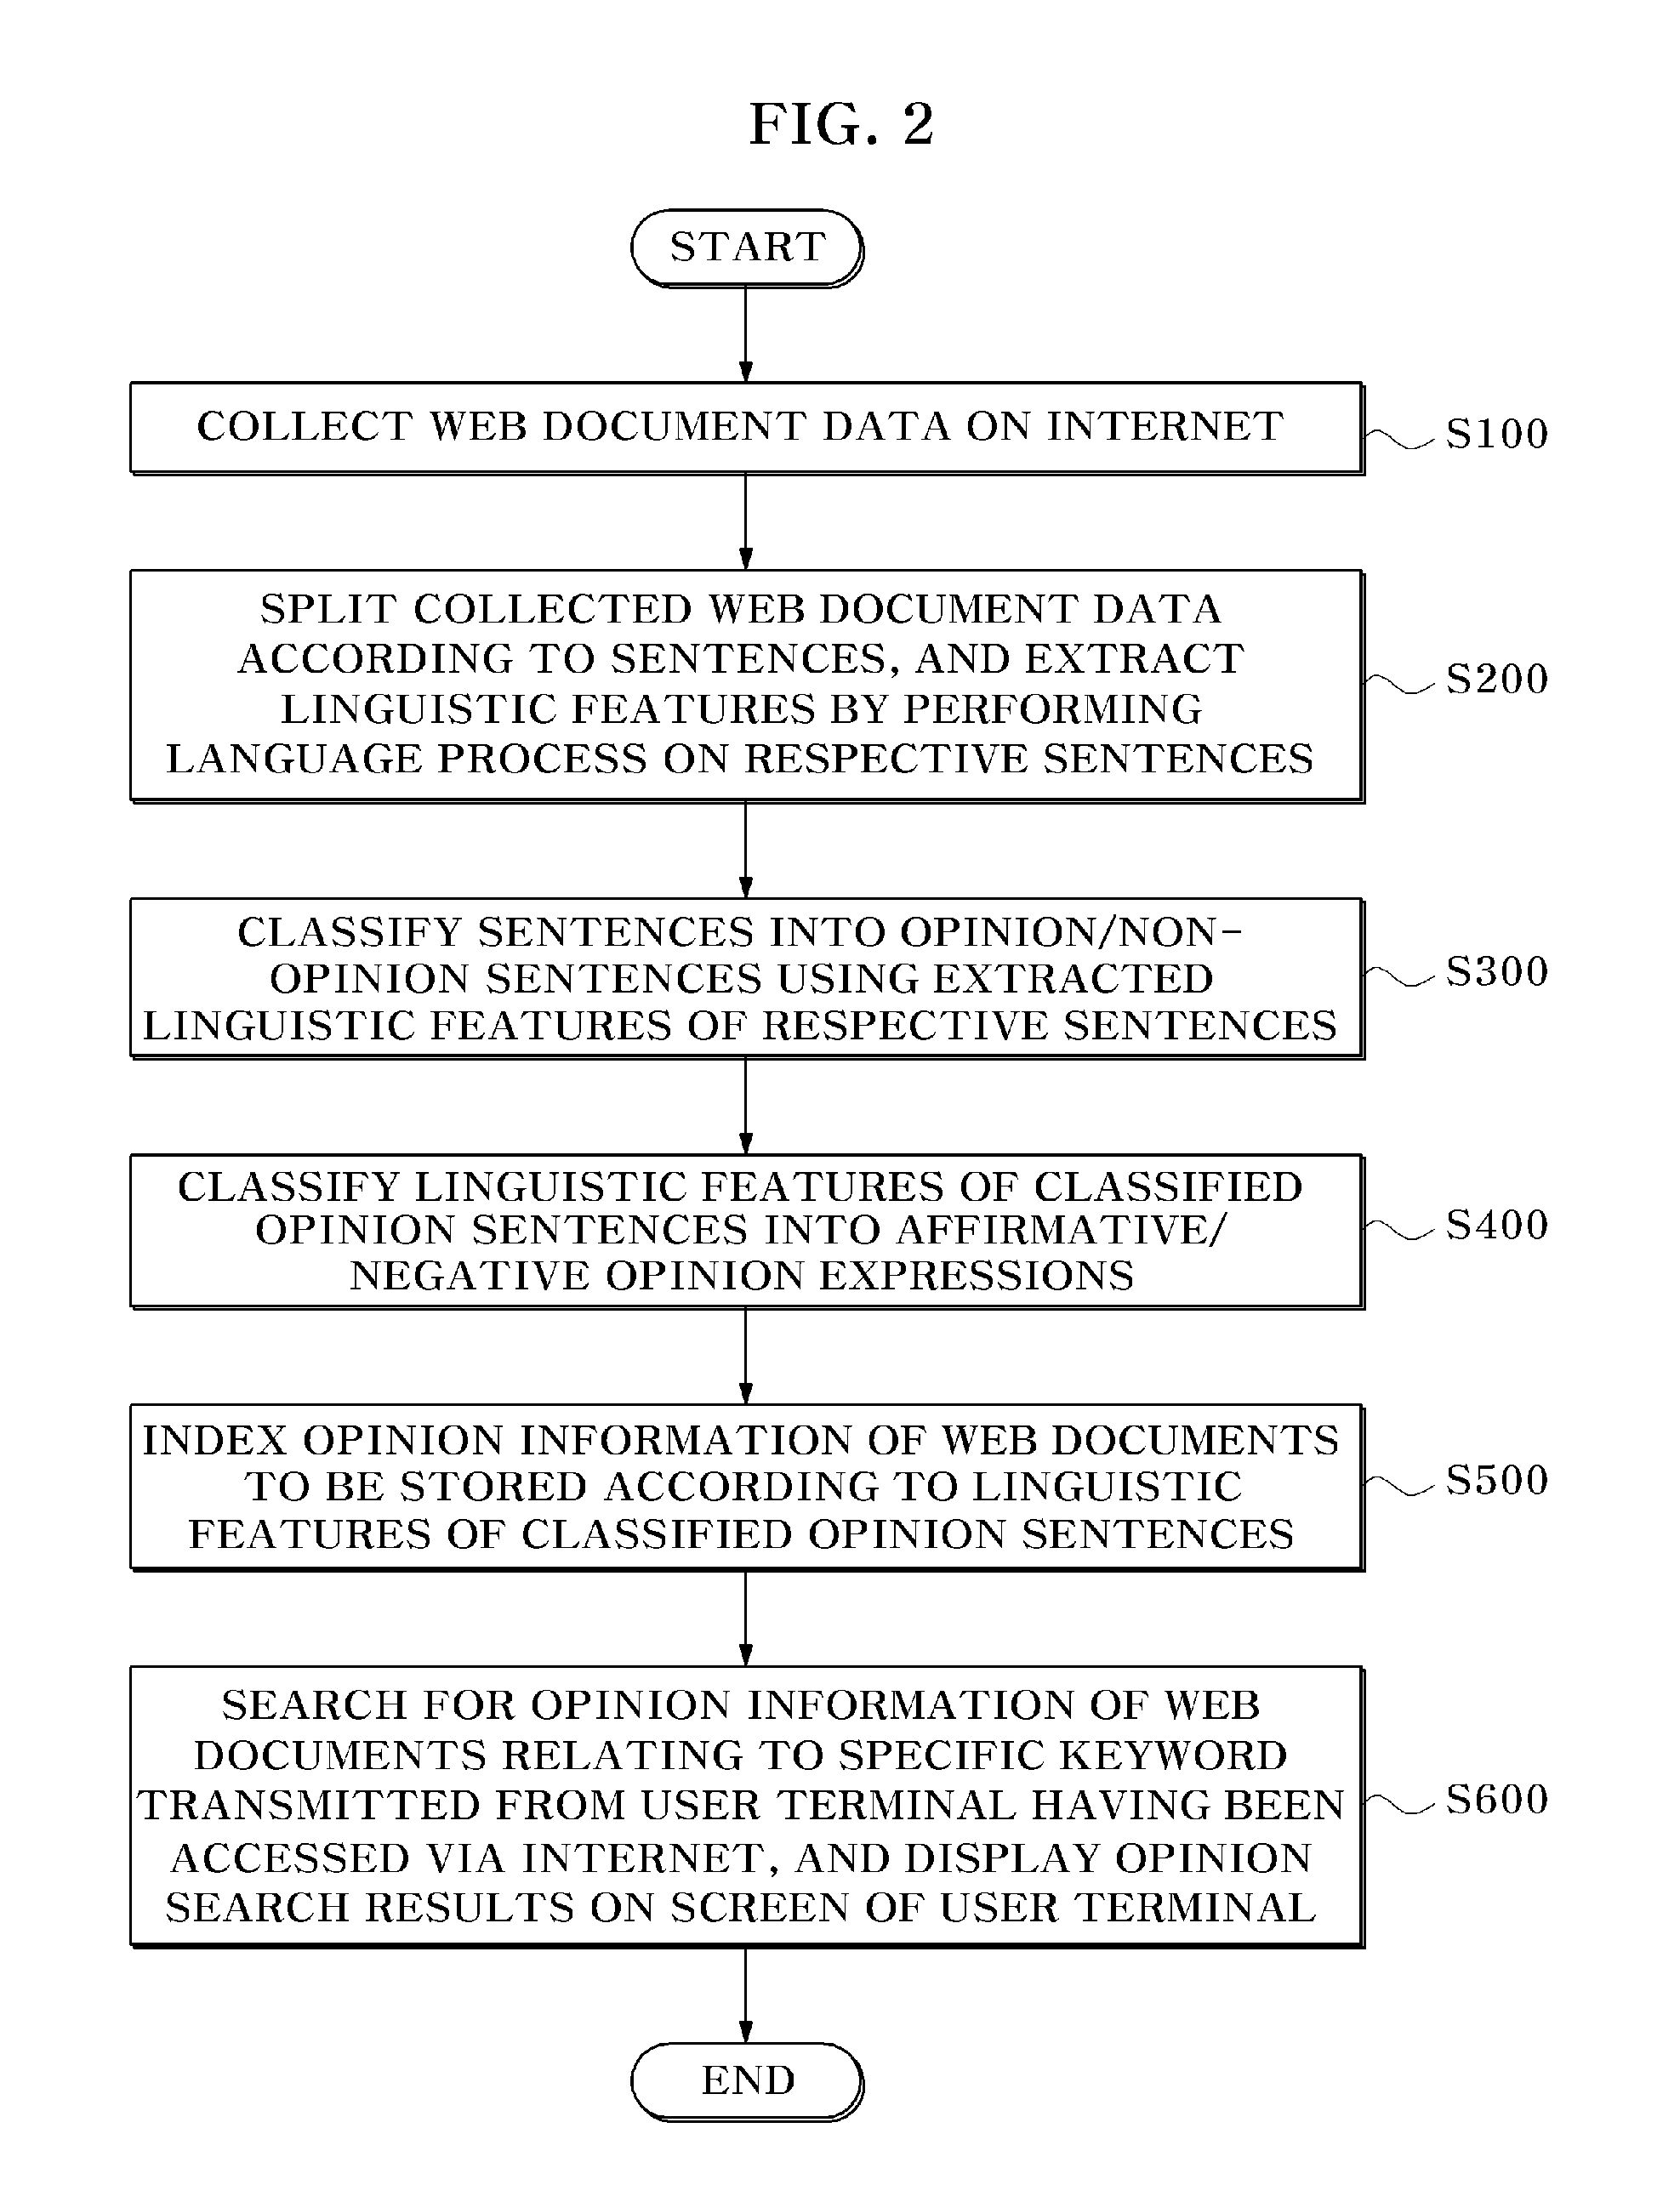 Internet-based opinion search system and method, and internet-based opinion search and advertising service system and method